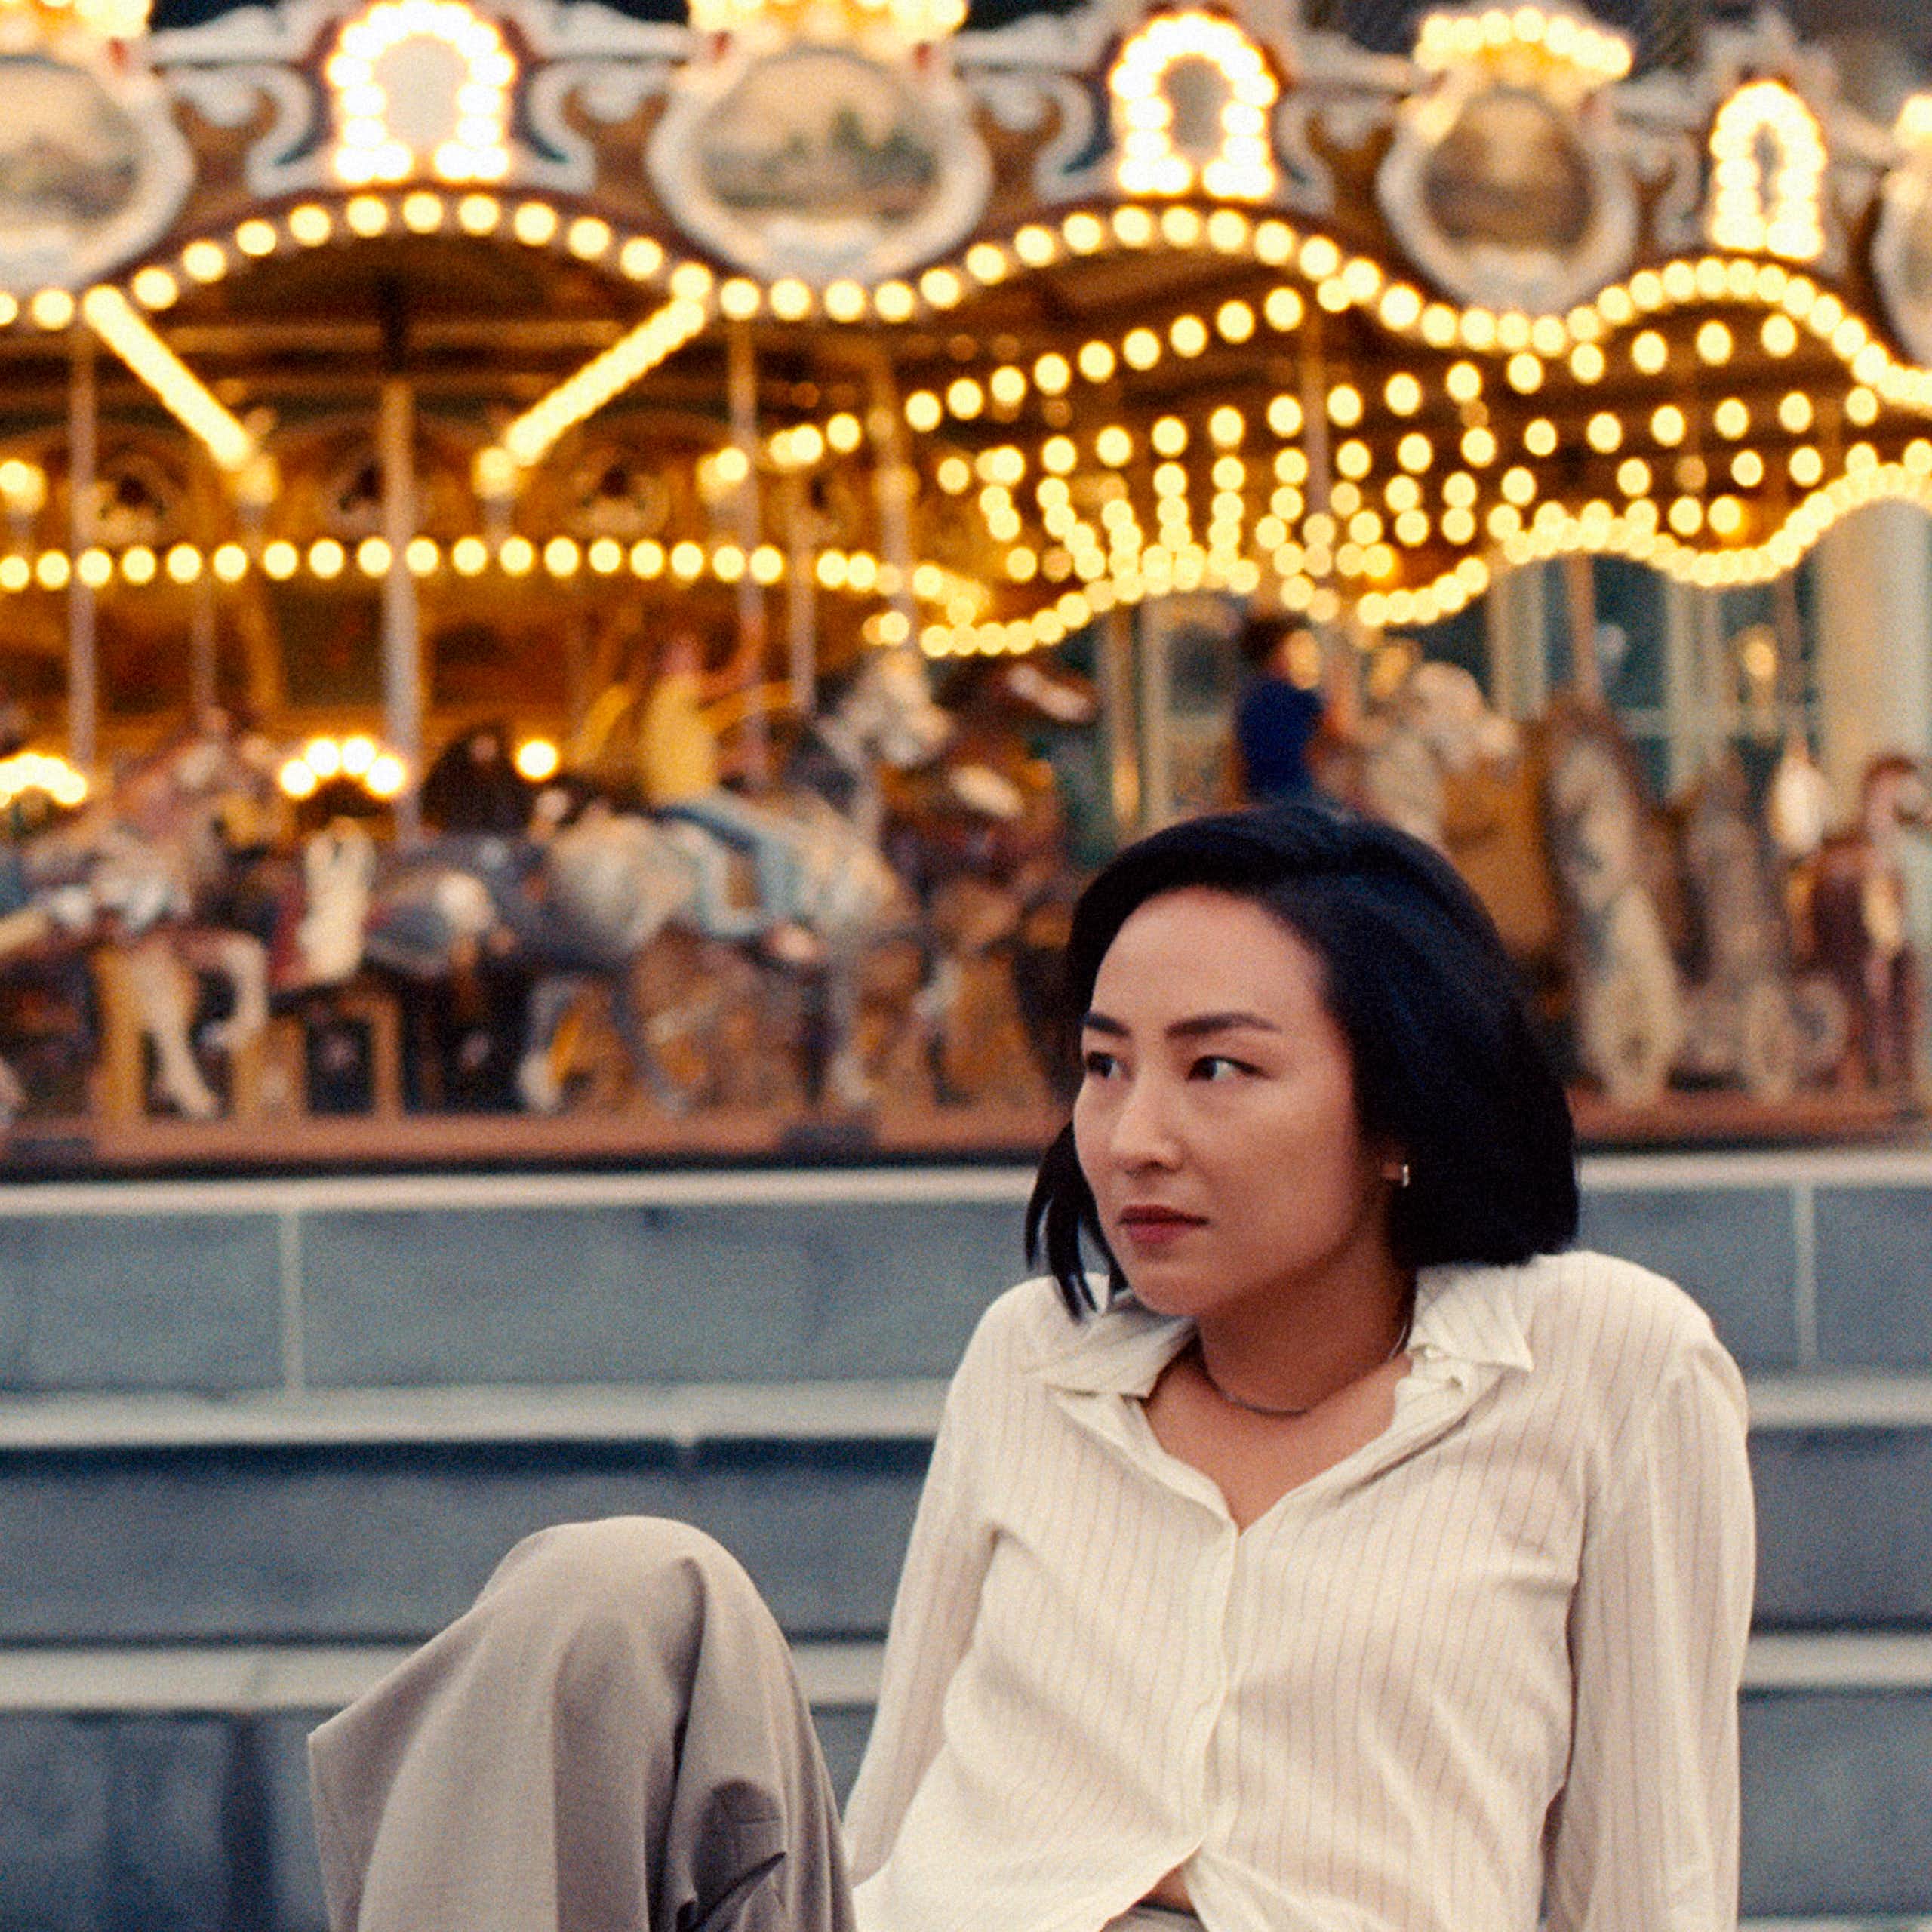 An Asian man and woman sit in front of a merry-go-round